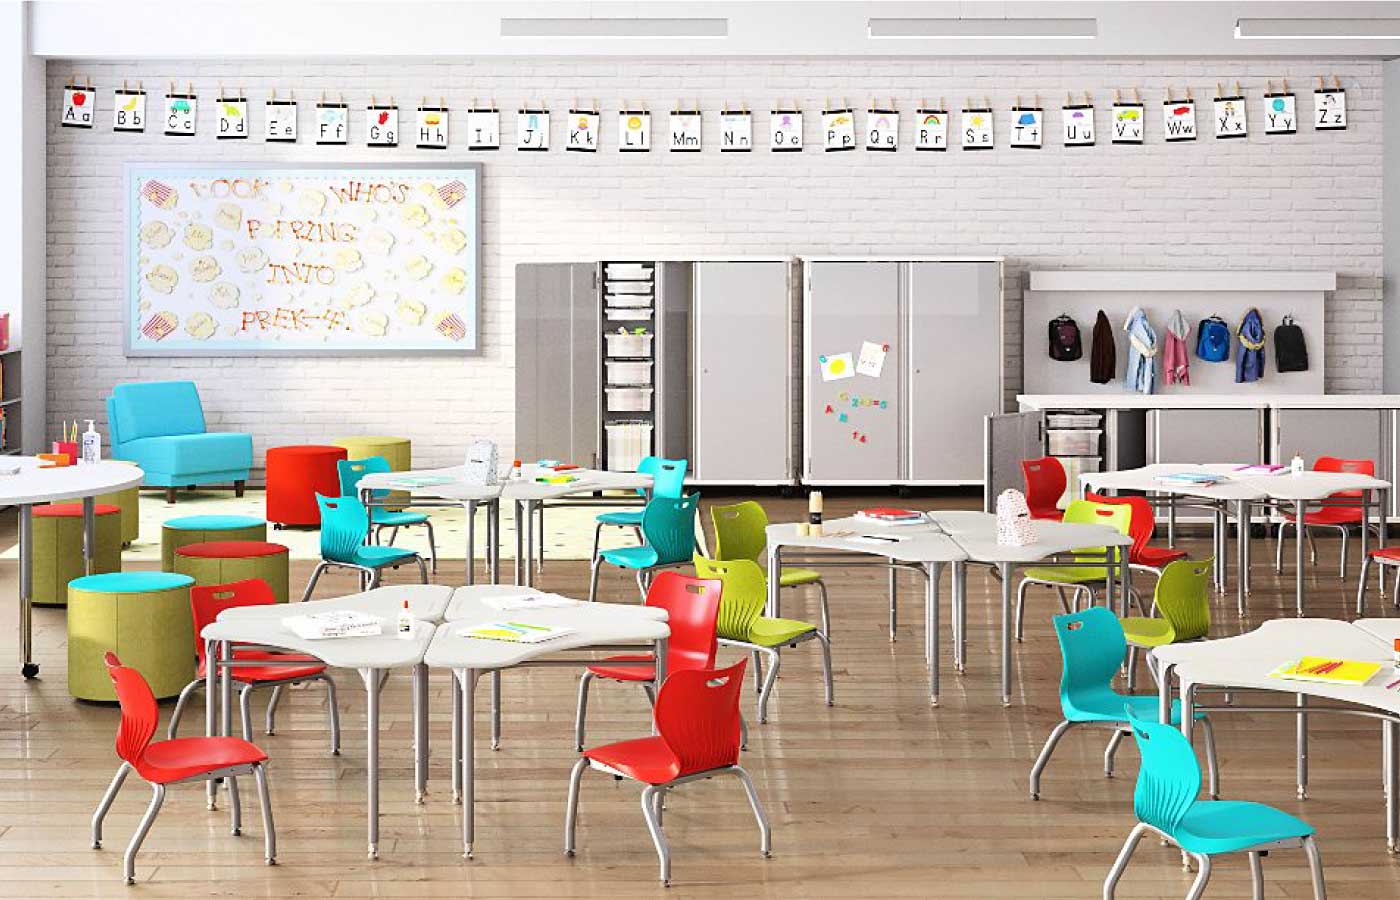 Education Solutions Classrooms